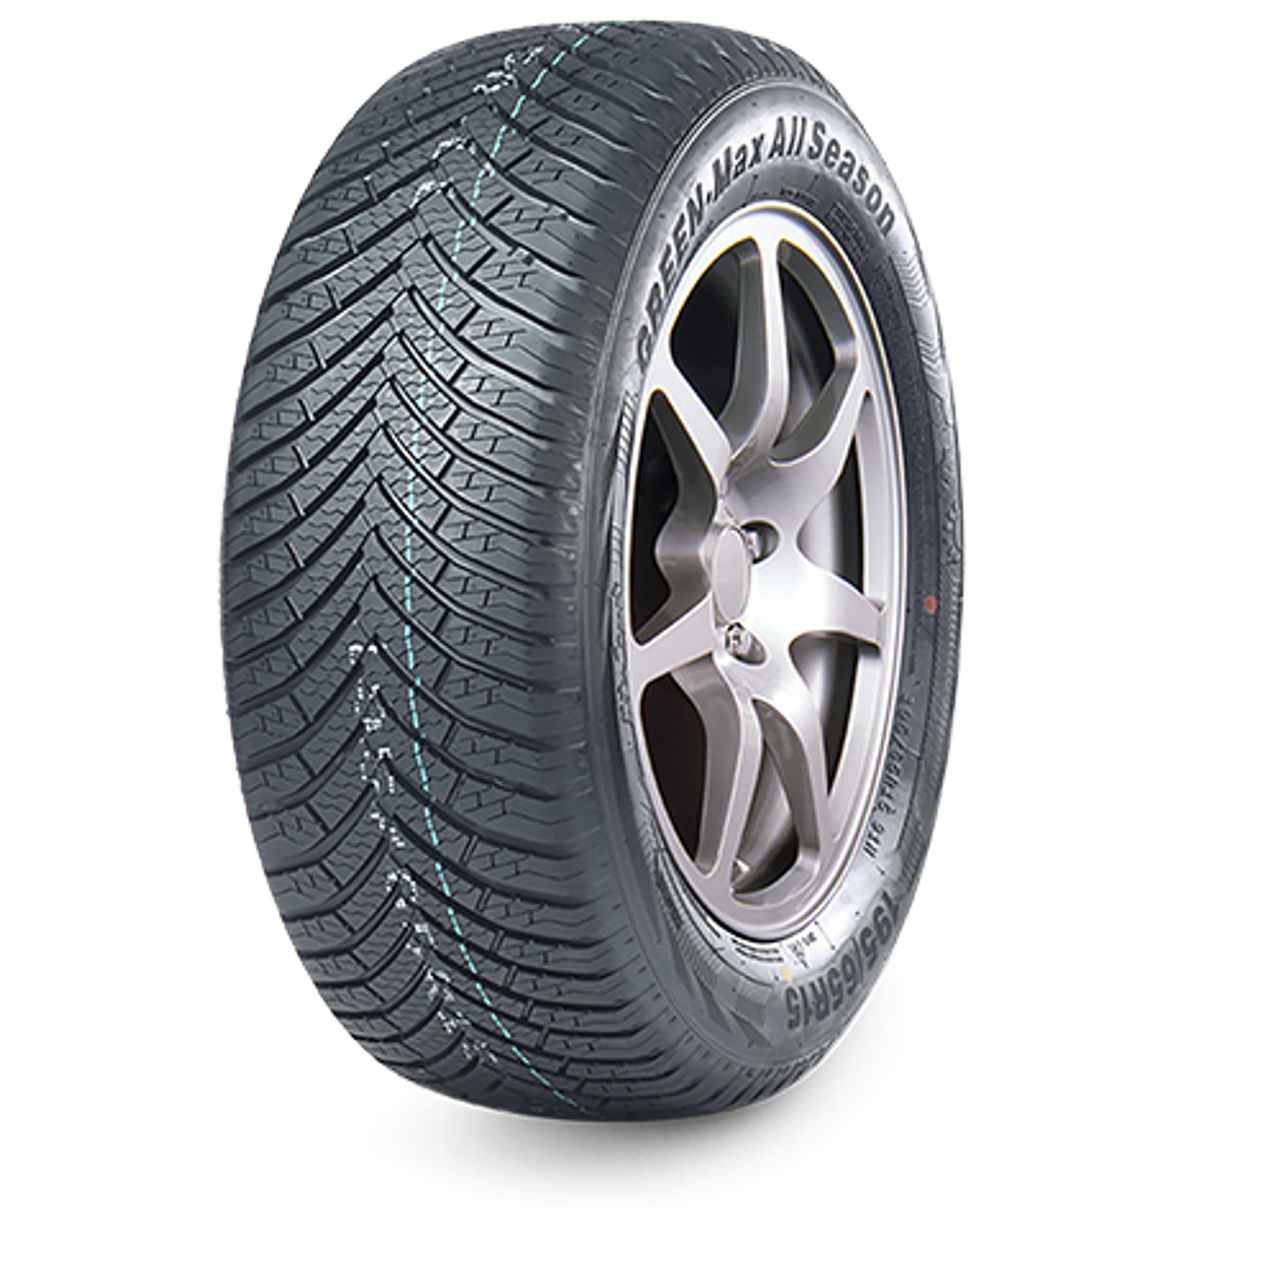 LINGLONG GREEN-MAX ALL SEASON 145/80R13 75T BSW